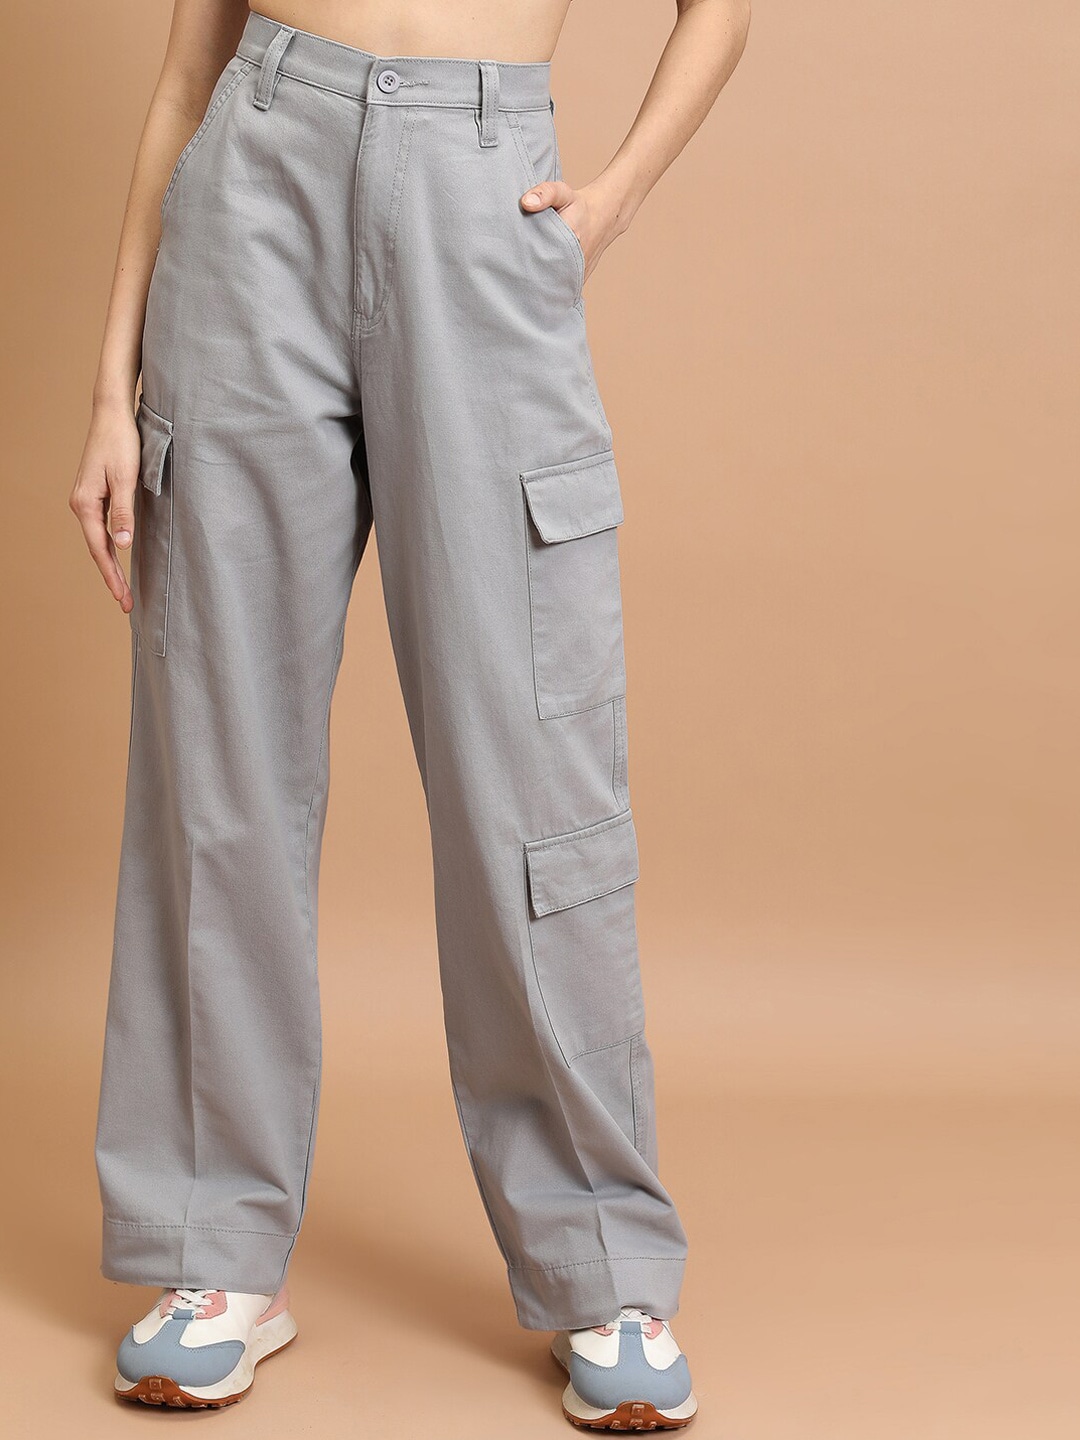 Tokyo Talkies Women Flared Cotton Cargo Trousers Price in India